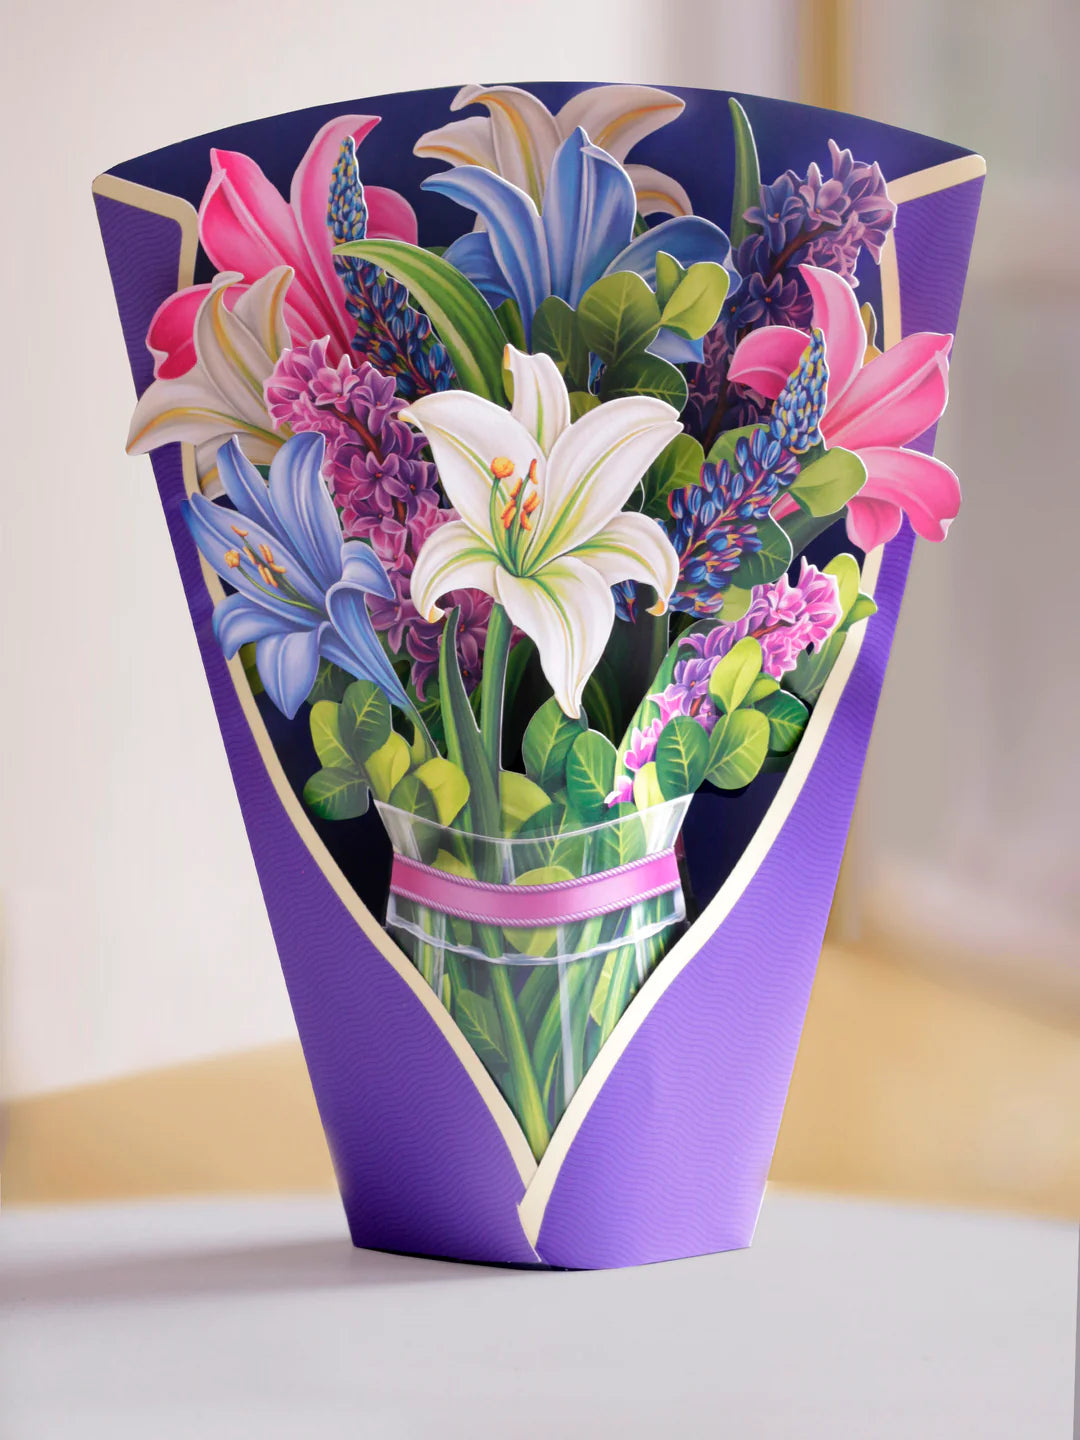 Lilies & Lupines Pop-up Bouquet